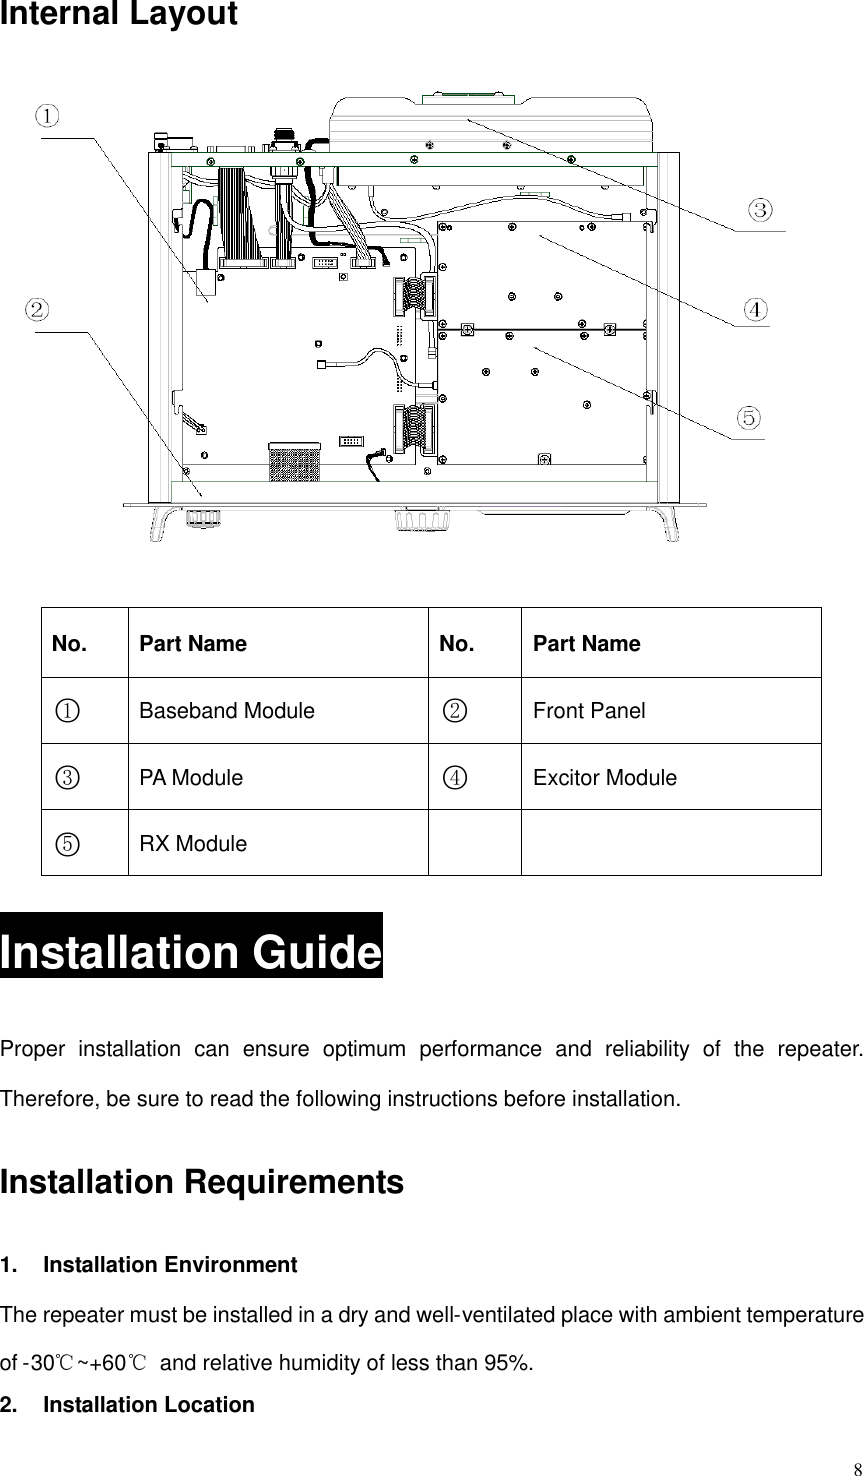 8Internal LayoutNo. Part Name No. Part Name○1Baseband Module ○2Front Panel○3PA Module ○4Excitor Module○5RX ModuleInstallation GuideProper installation can ensure optimum performance and reliability of the repeater.Therefore, be sure to read the following instructions before installation.Installation Requirements1. Installation EnvironmentThe repeater must be installed in a dry and well-ventilated place with ambient temperatureof -30℃~+60℃and relative humidity of less than 95%.2. Installation Location